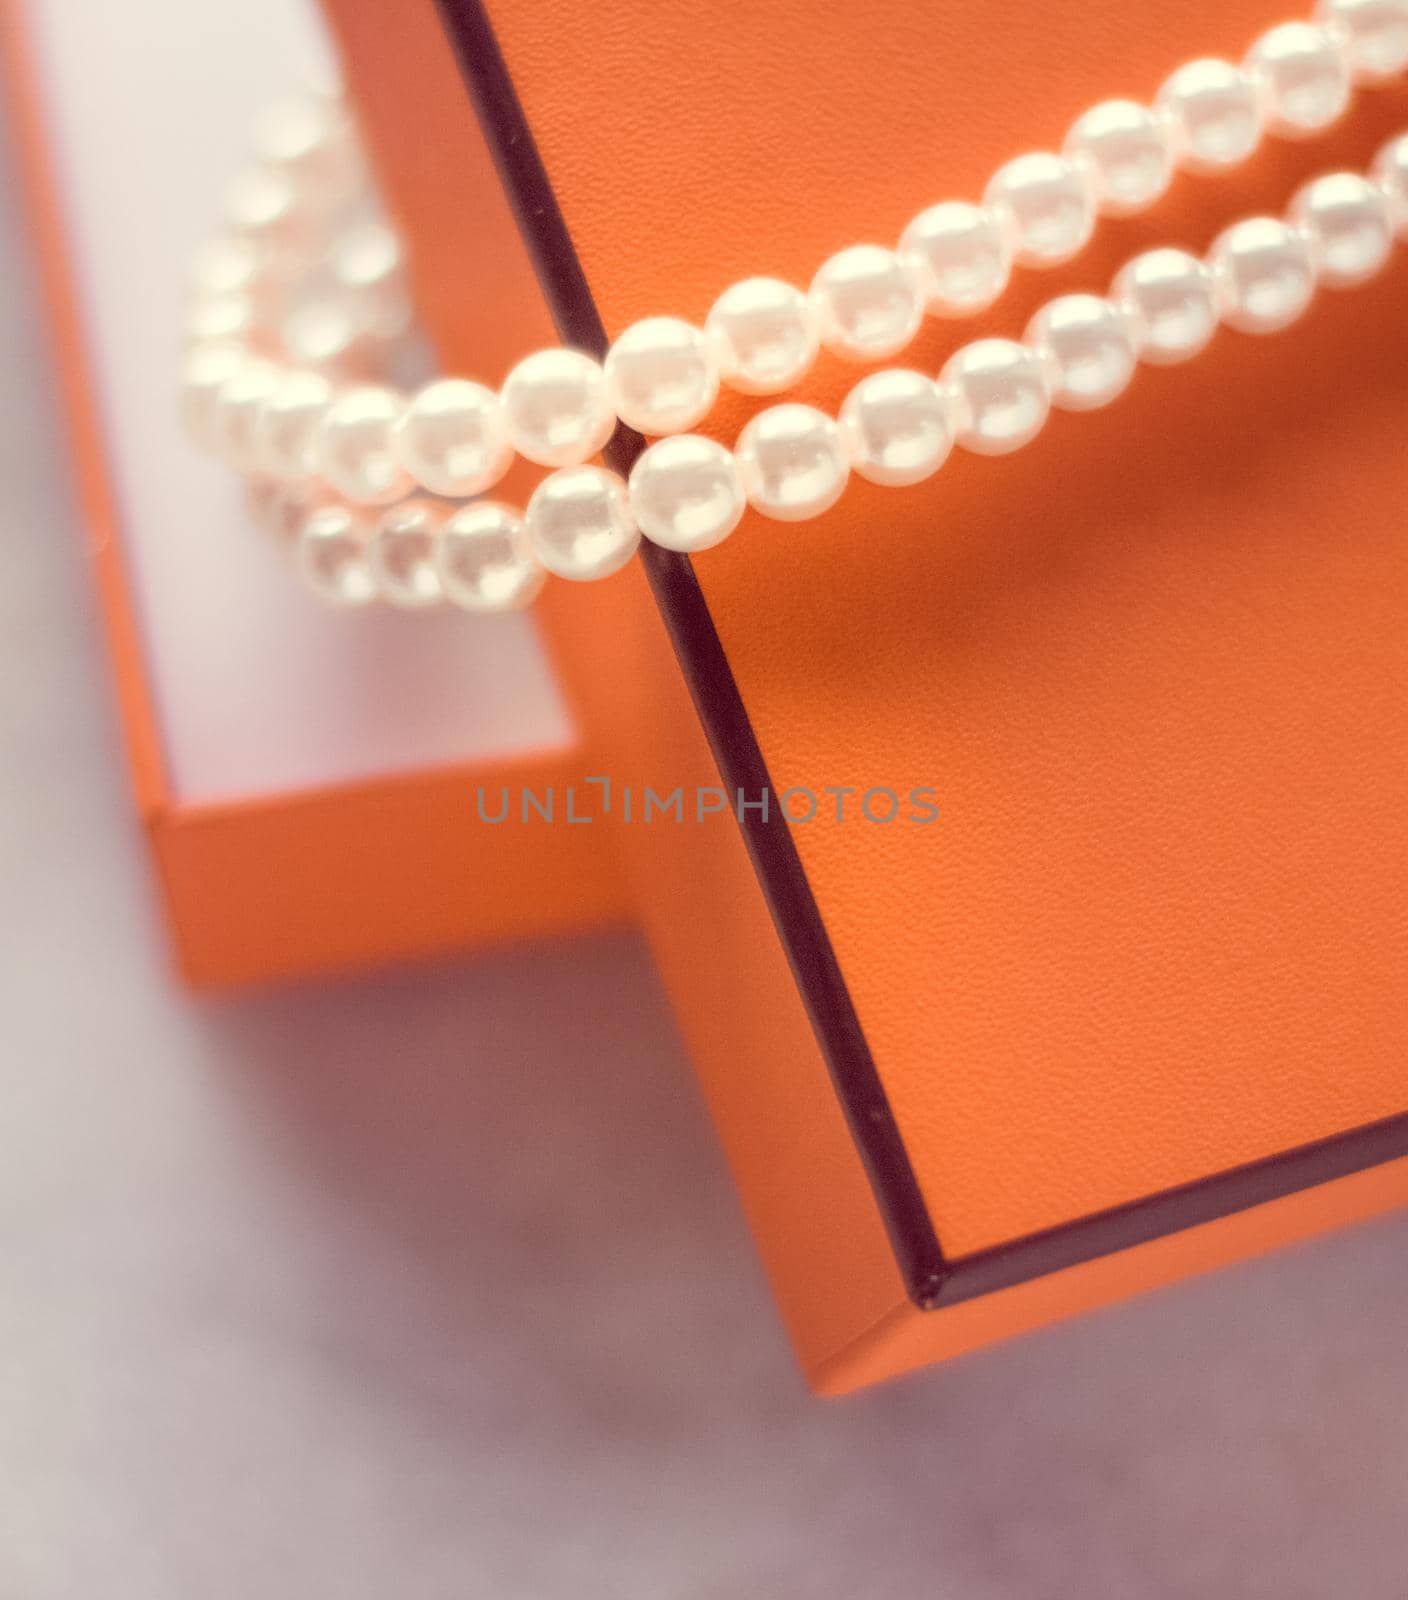 Chic pearl jewellery in a present box - Valentine's day ideas, luxury shopping and holiday inspiration concept. The perfect gift for her